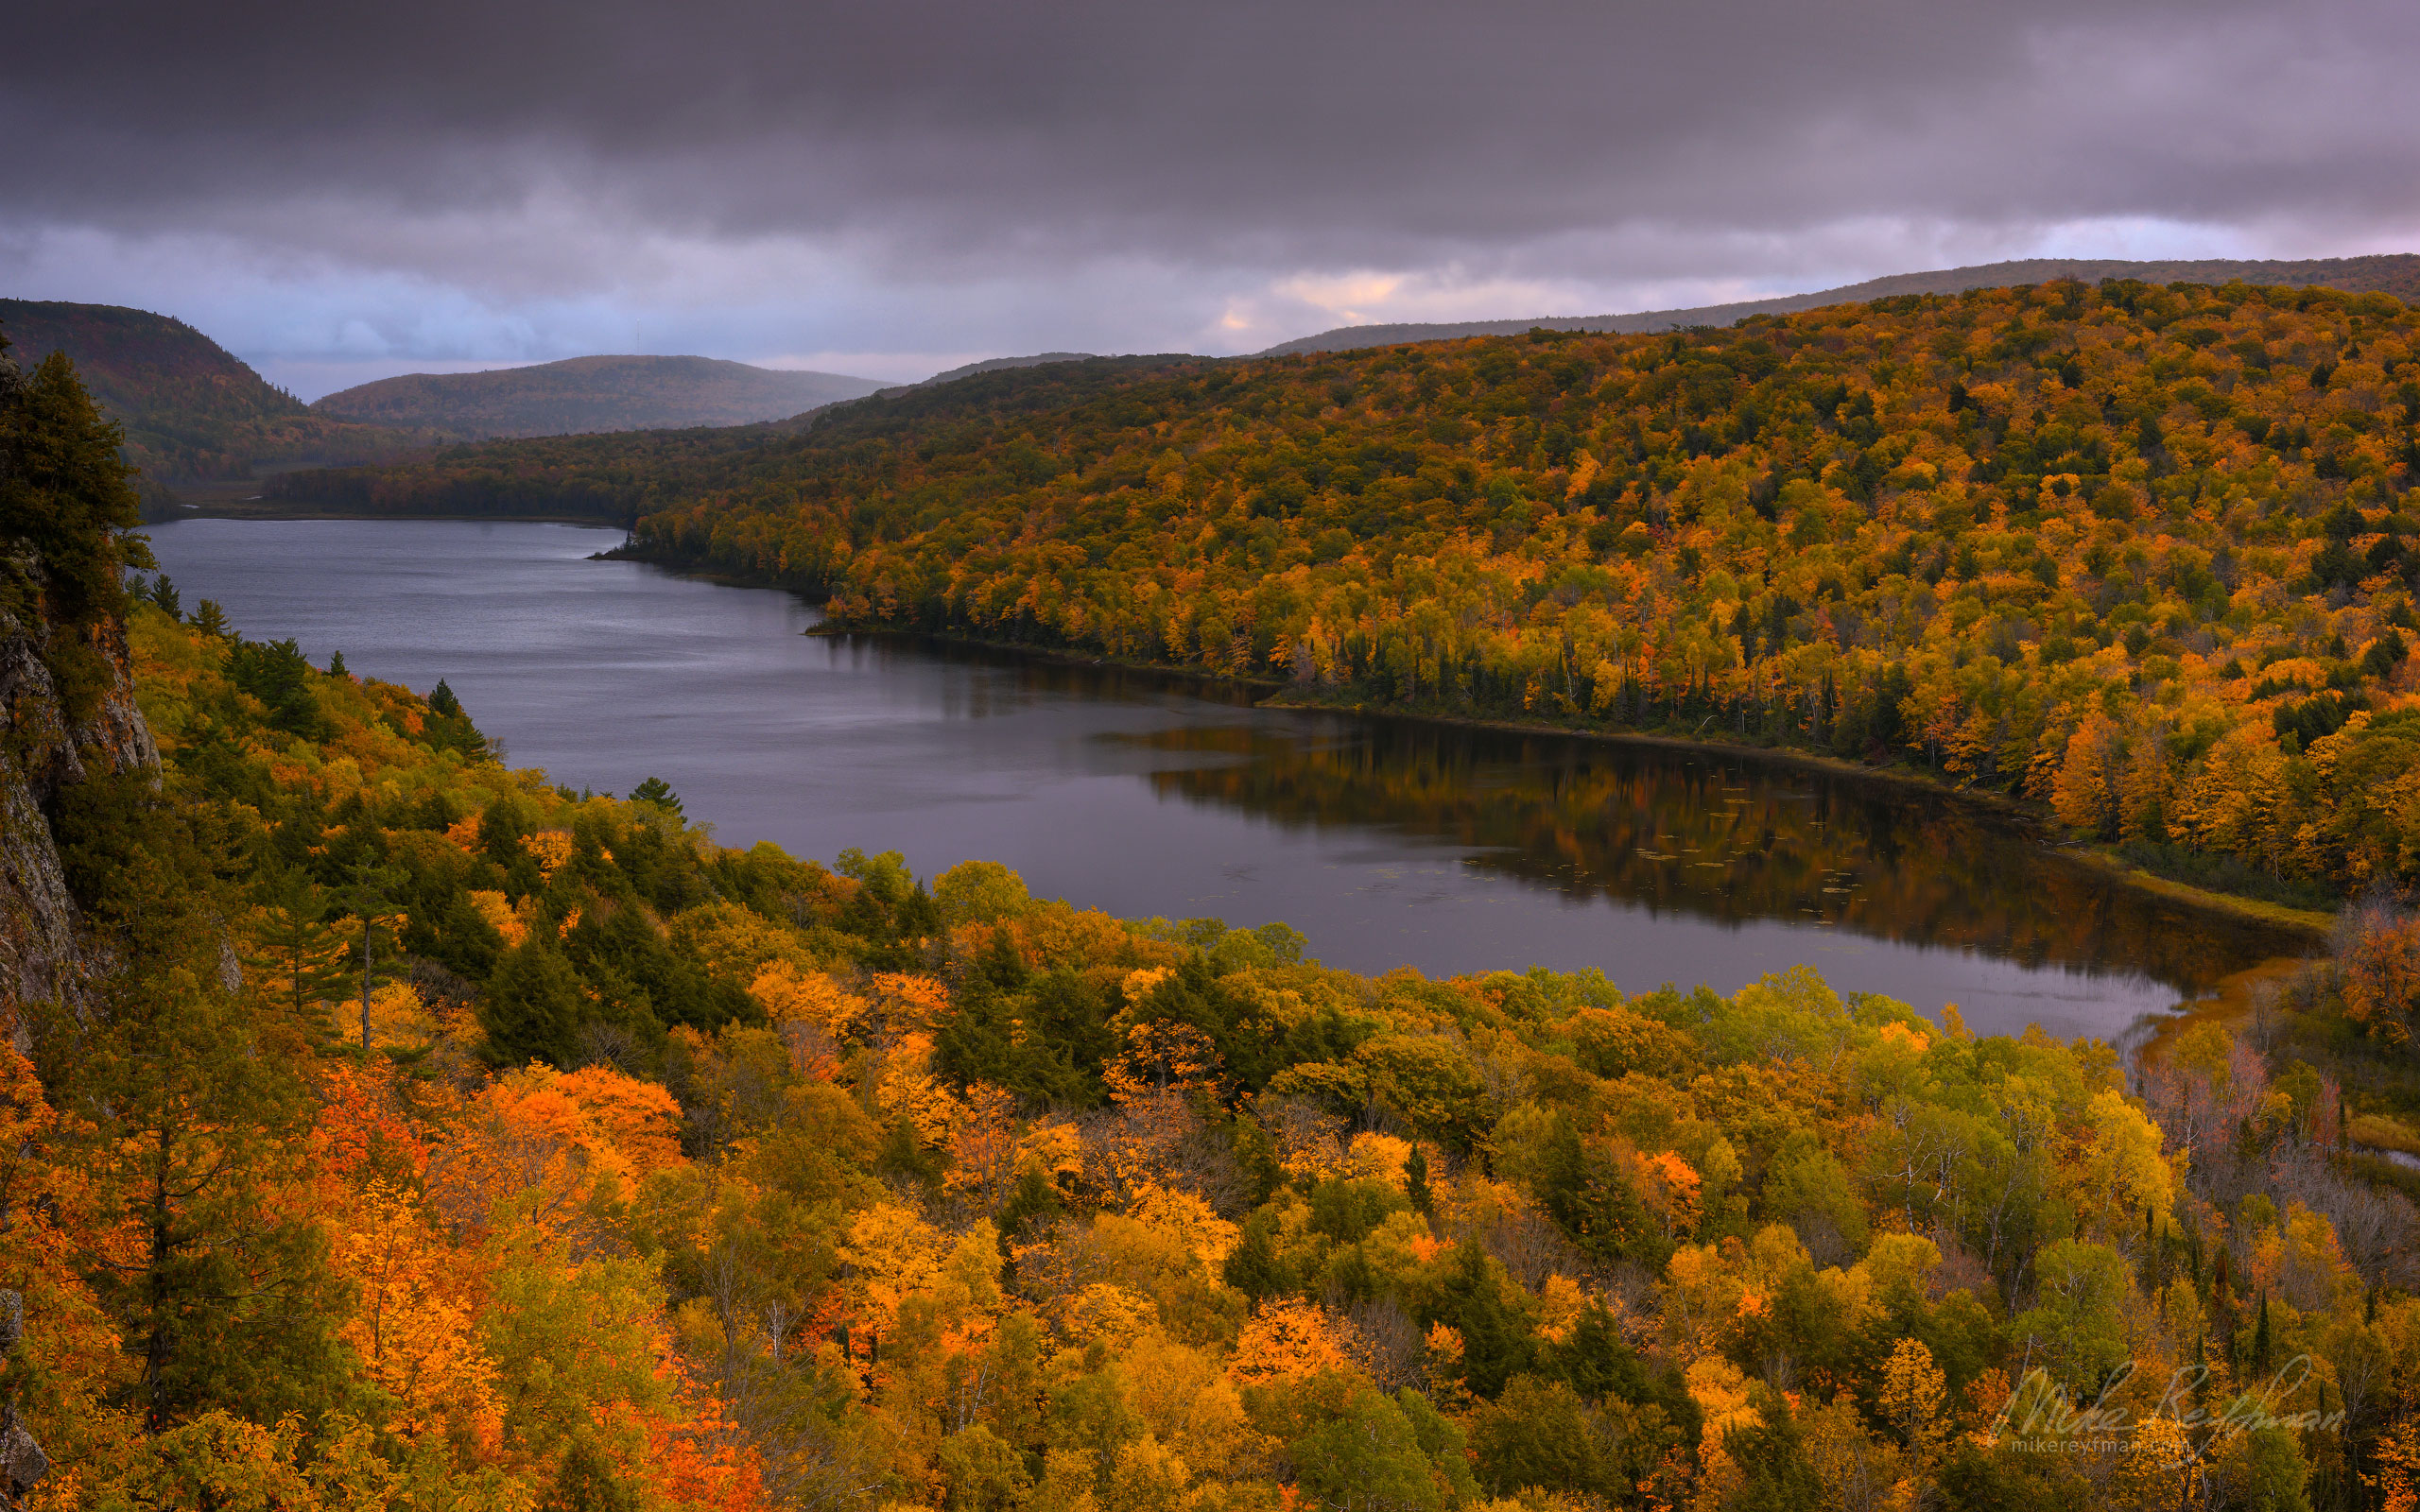 Lake of the Clouds, Porcupine Mountains Wilderness State Park, Upper Peninsula, Michigan, USA UP-MI_086_ZRA6998.jpg - Michigan's Upper Peninsula - the best destination in US for fall colors. - Mike Reyfman Photography